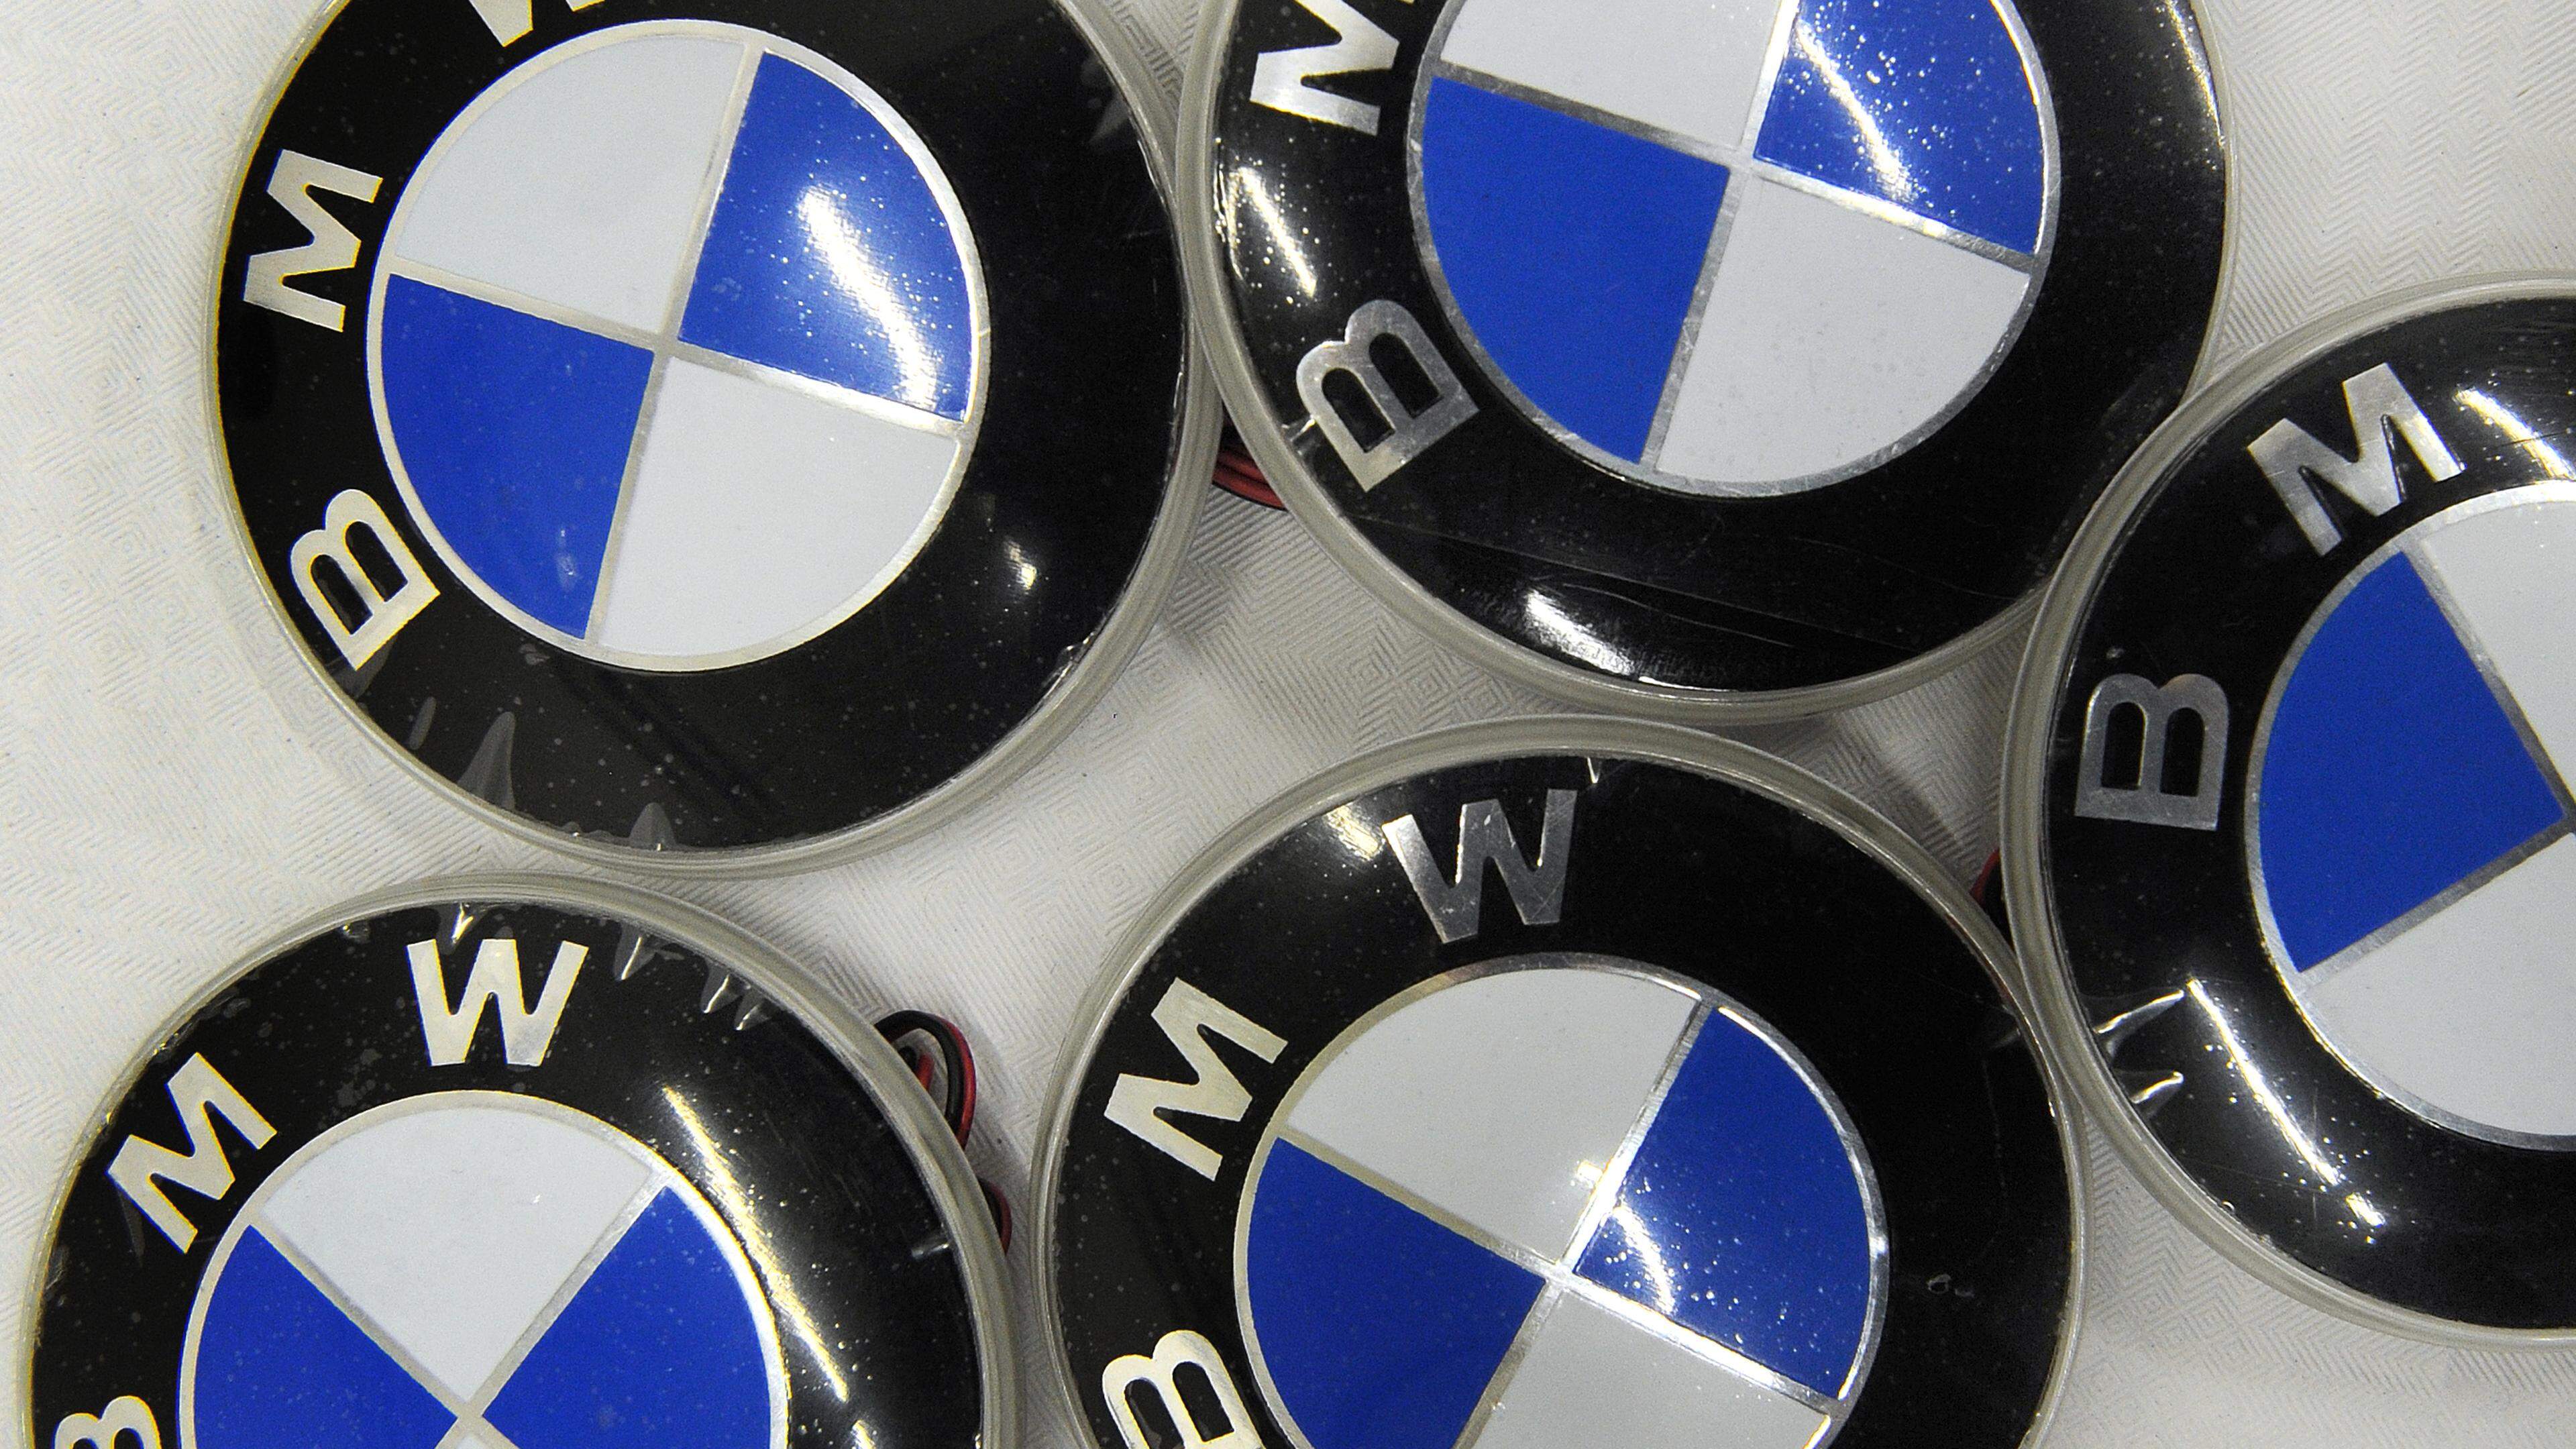 Amazon and BMW successfully sued over trademark piracy